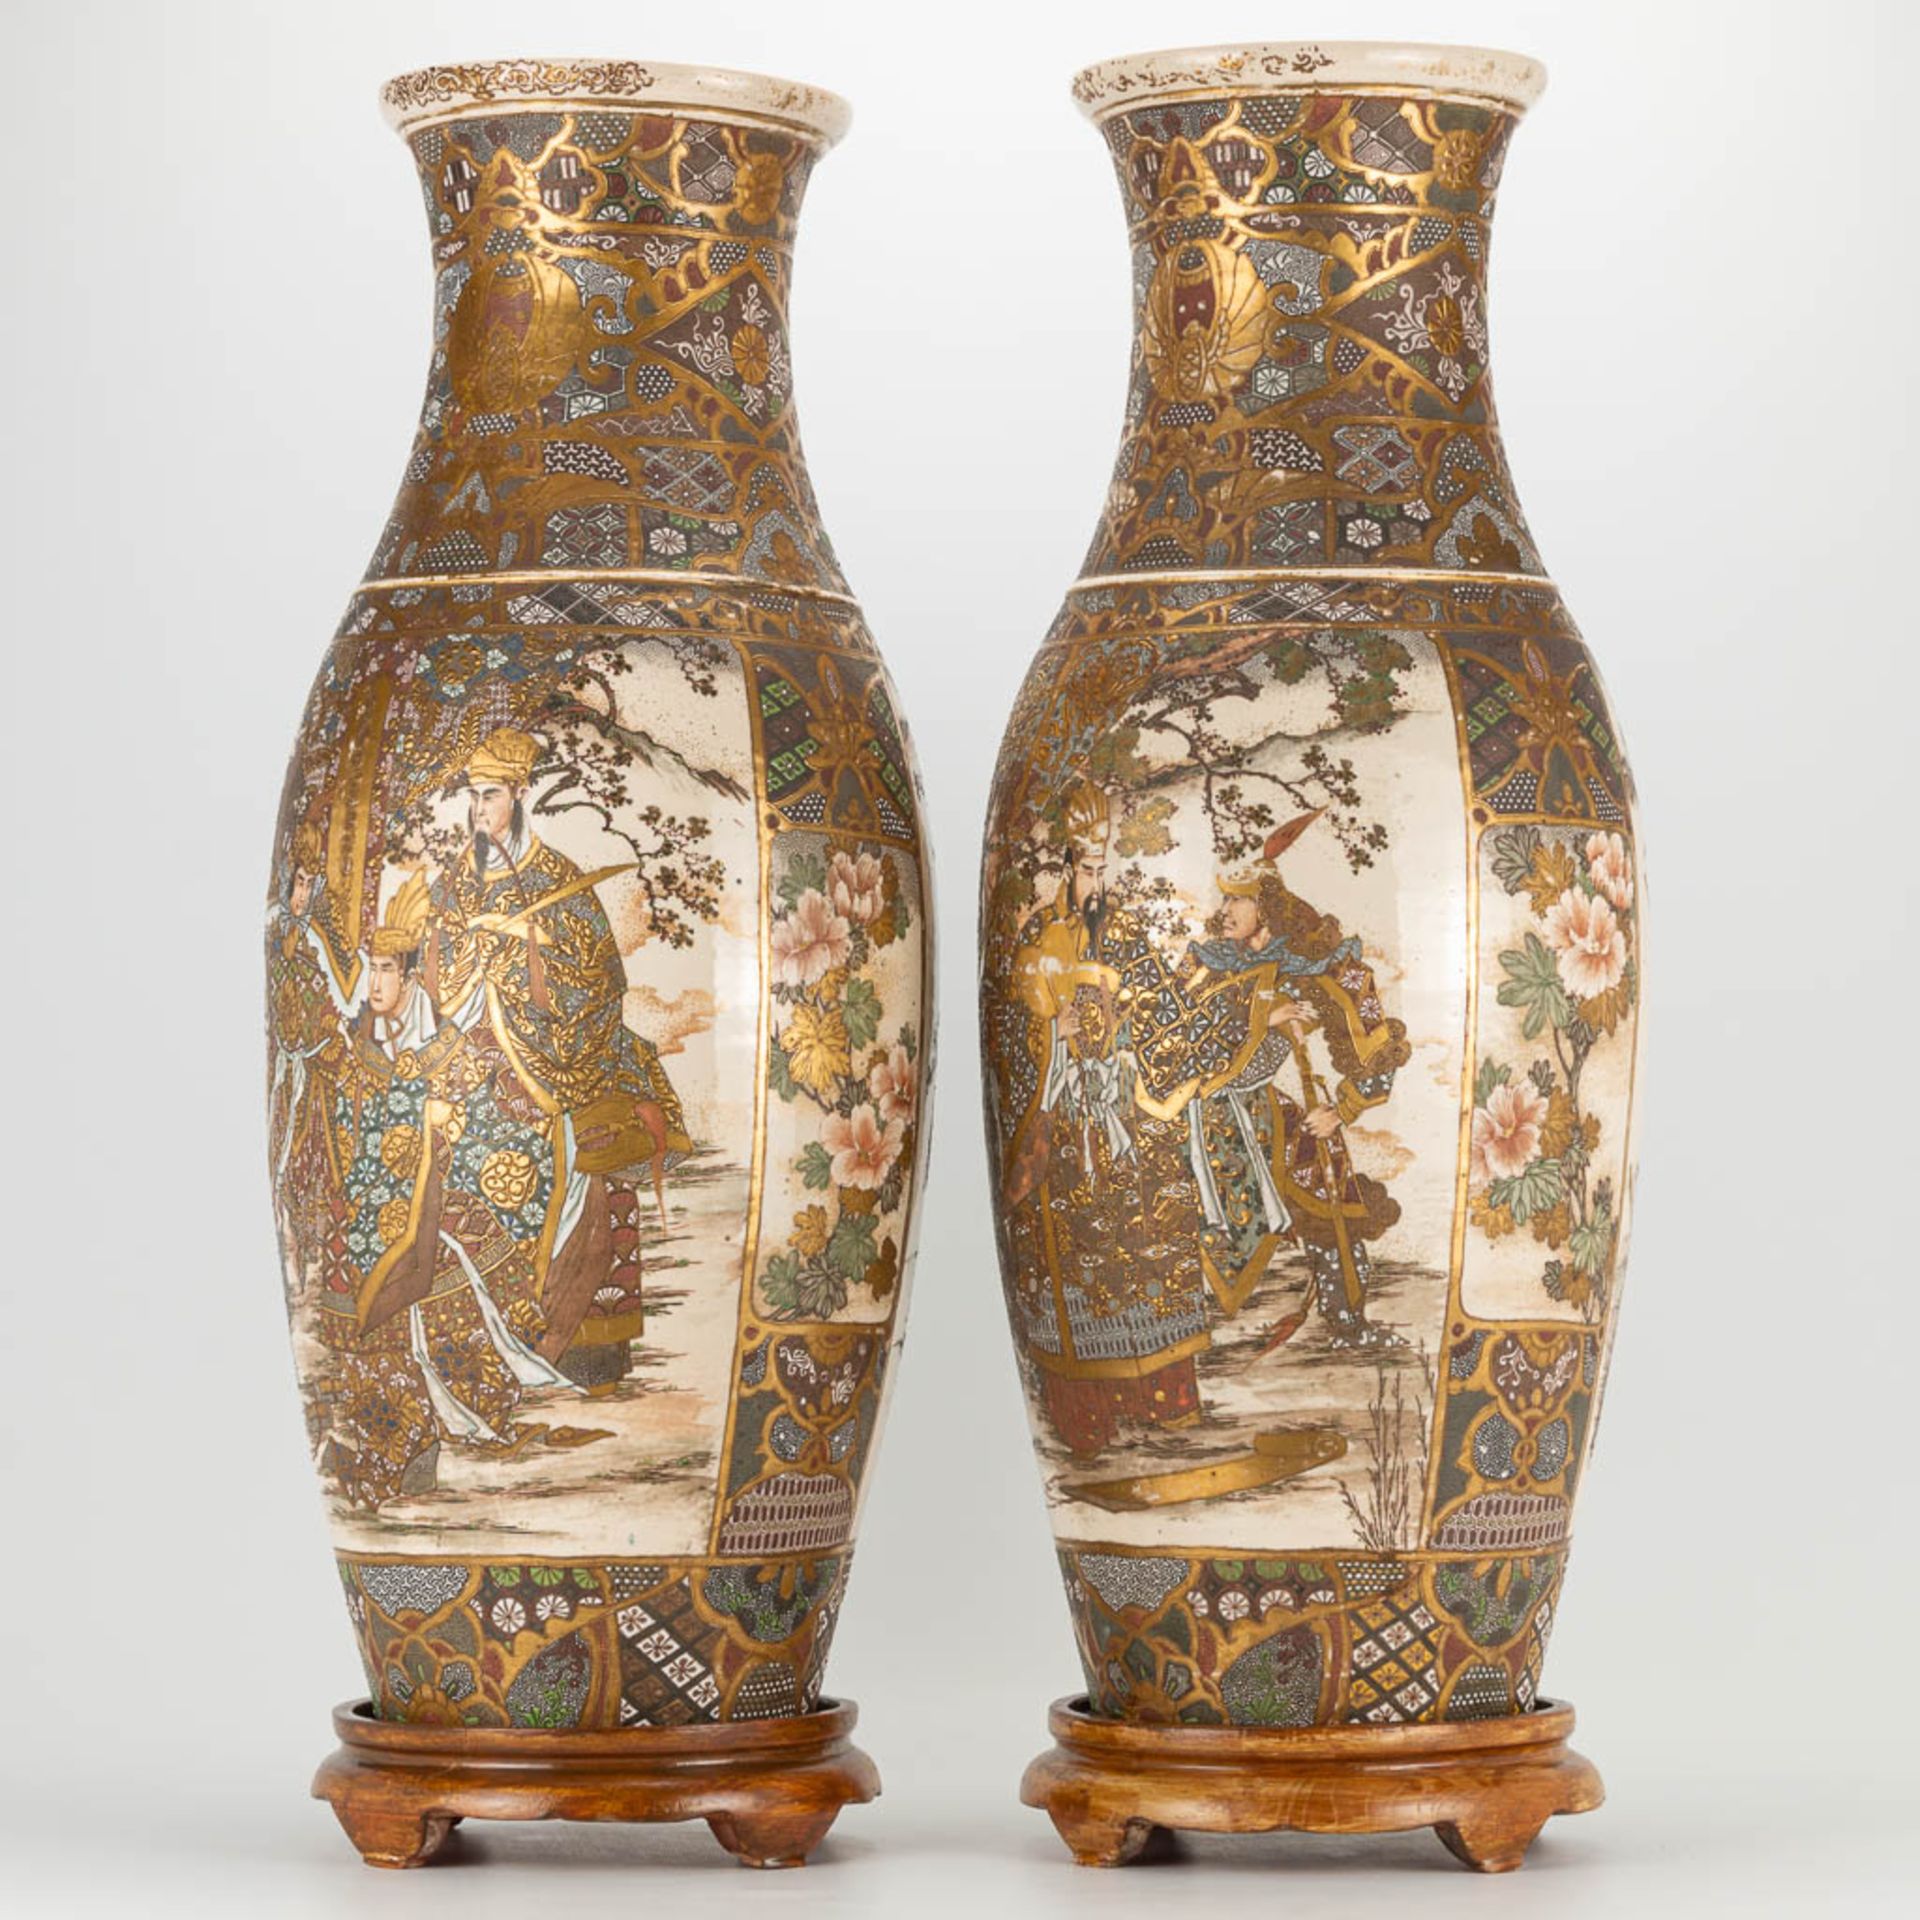 A pair of Japanese Satsuma vases with decor of warriors standing on a wood base. 19th/20th century. - Image 5 of 22